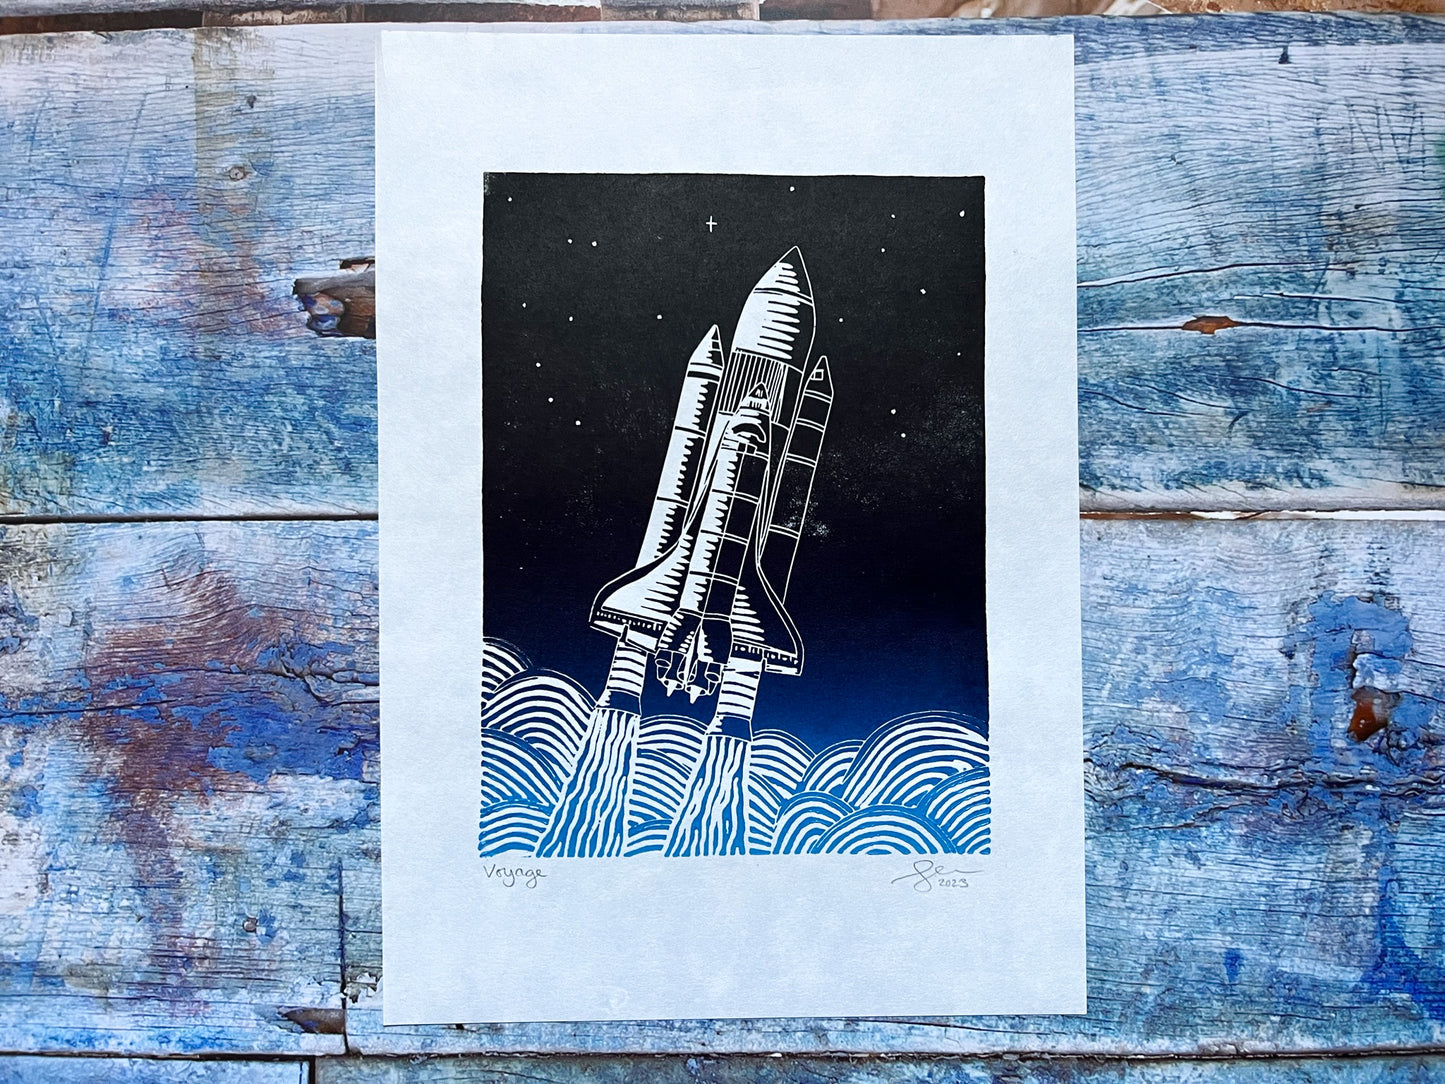 An A4 lino print with a light blue to black gradient or a space shuttled exiting earth's atmosphere